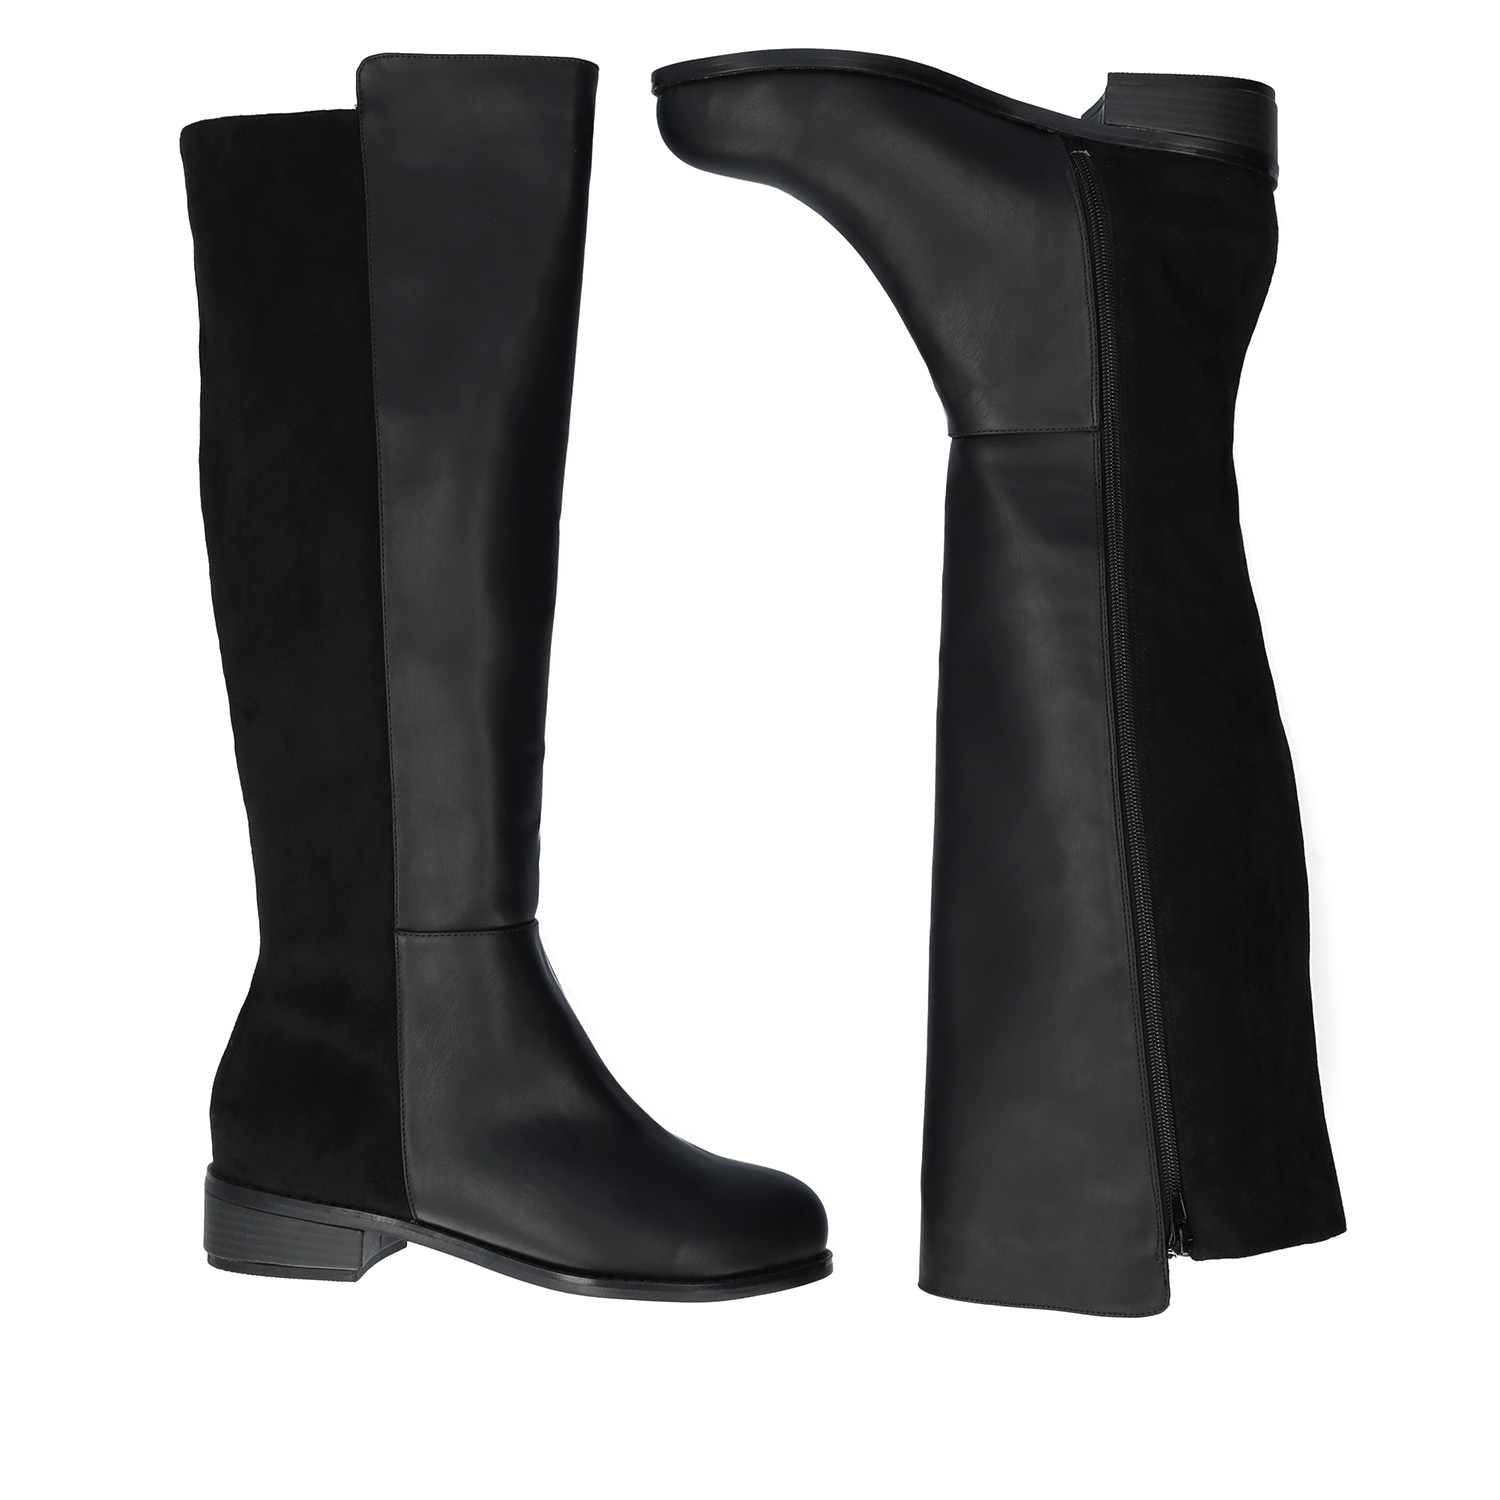 Flat knee-high boots combined in black colour. 